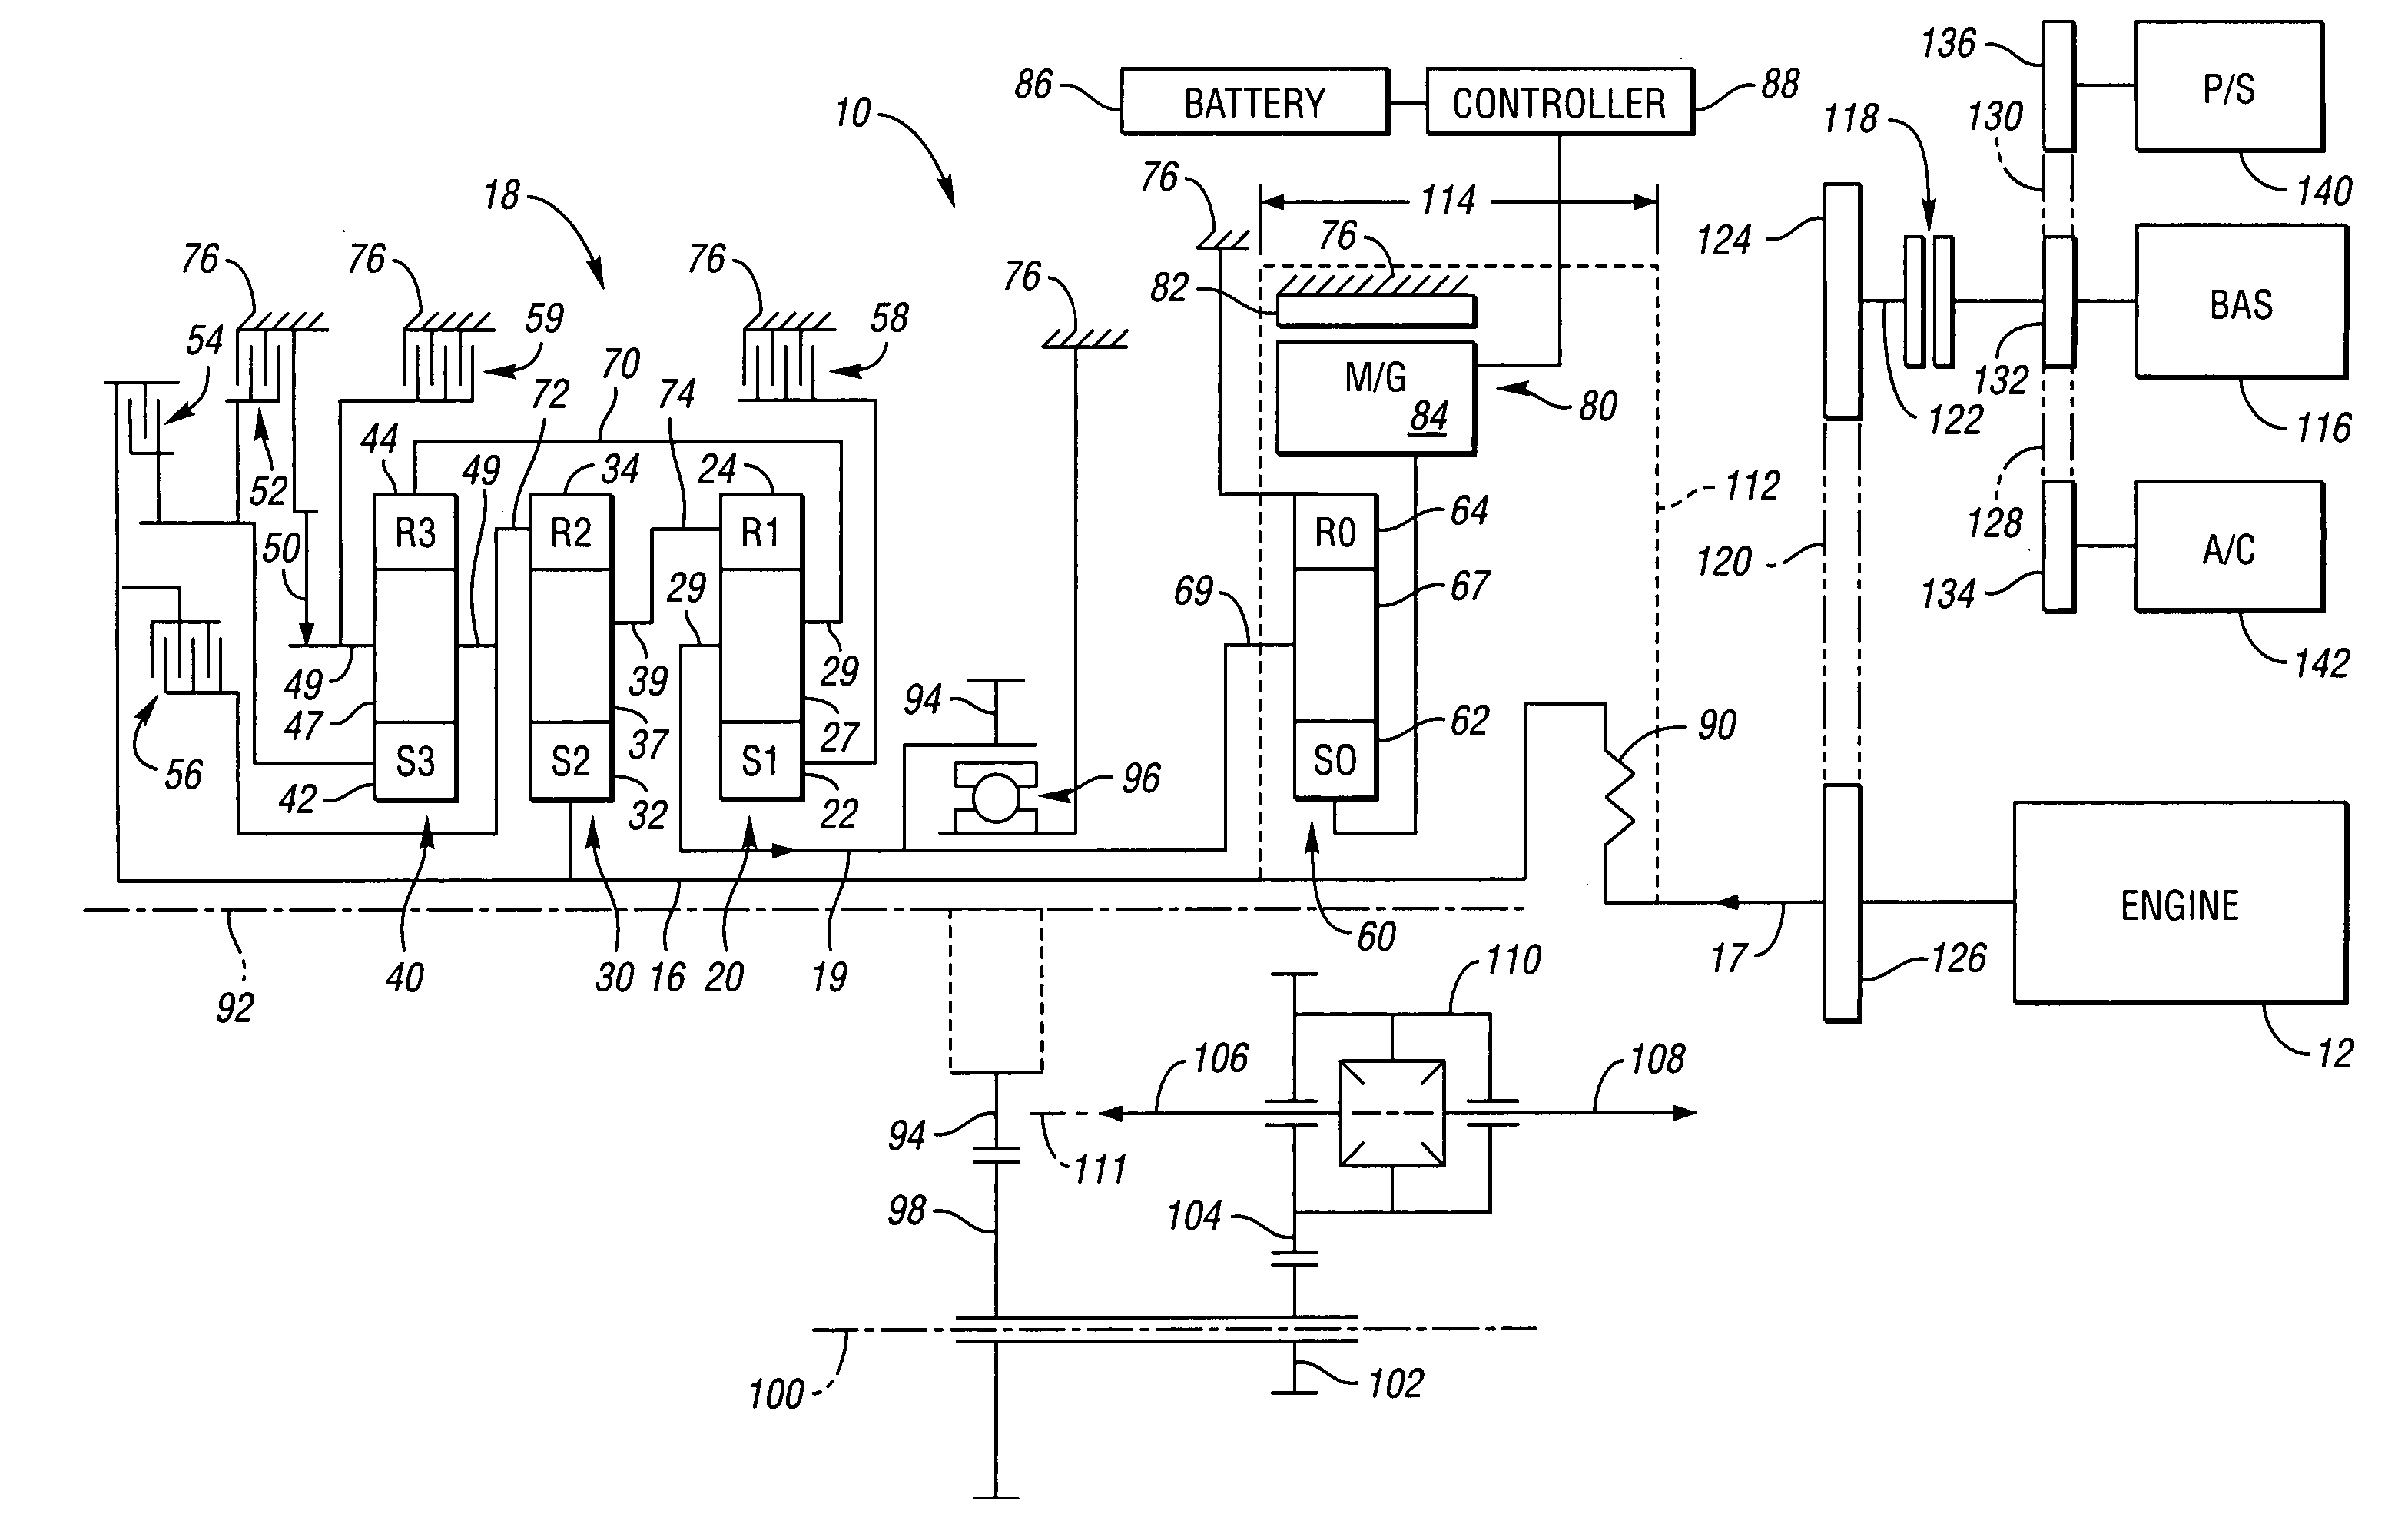 Electro-mechanical transmission with six speed ratios and a method of redesigning a transmission